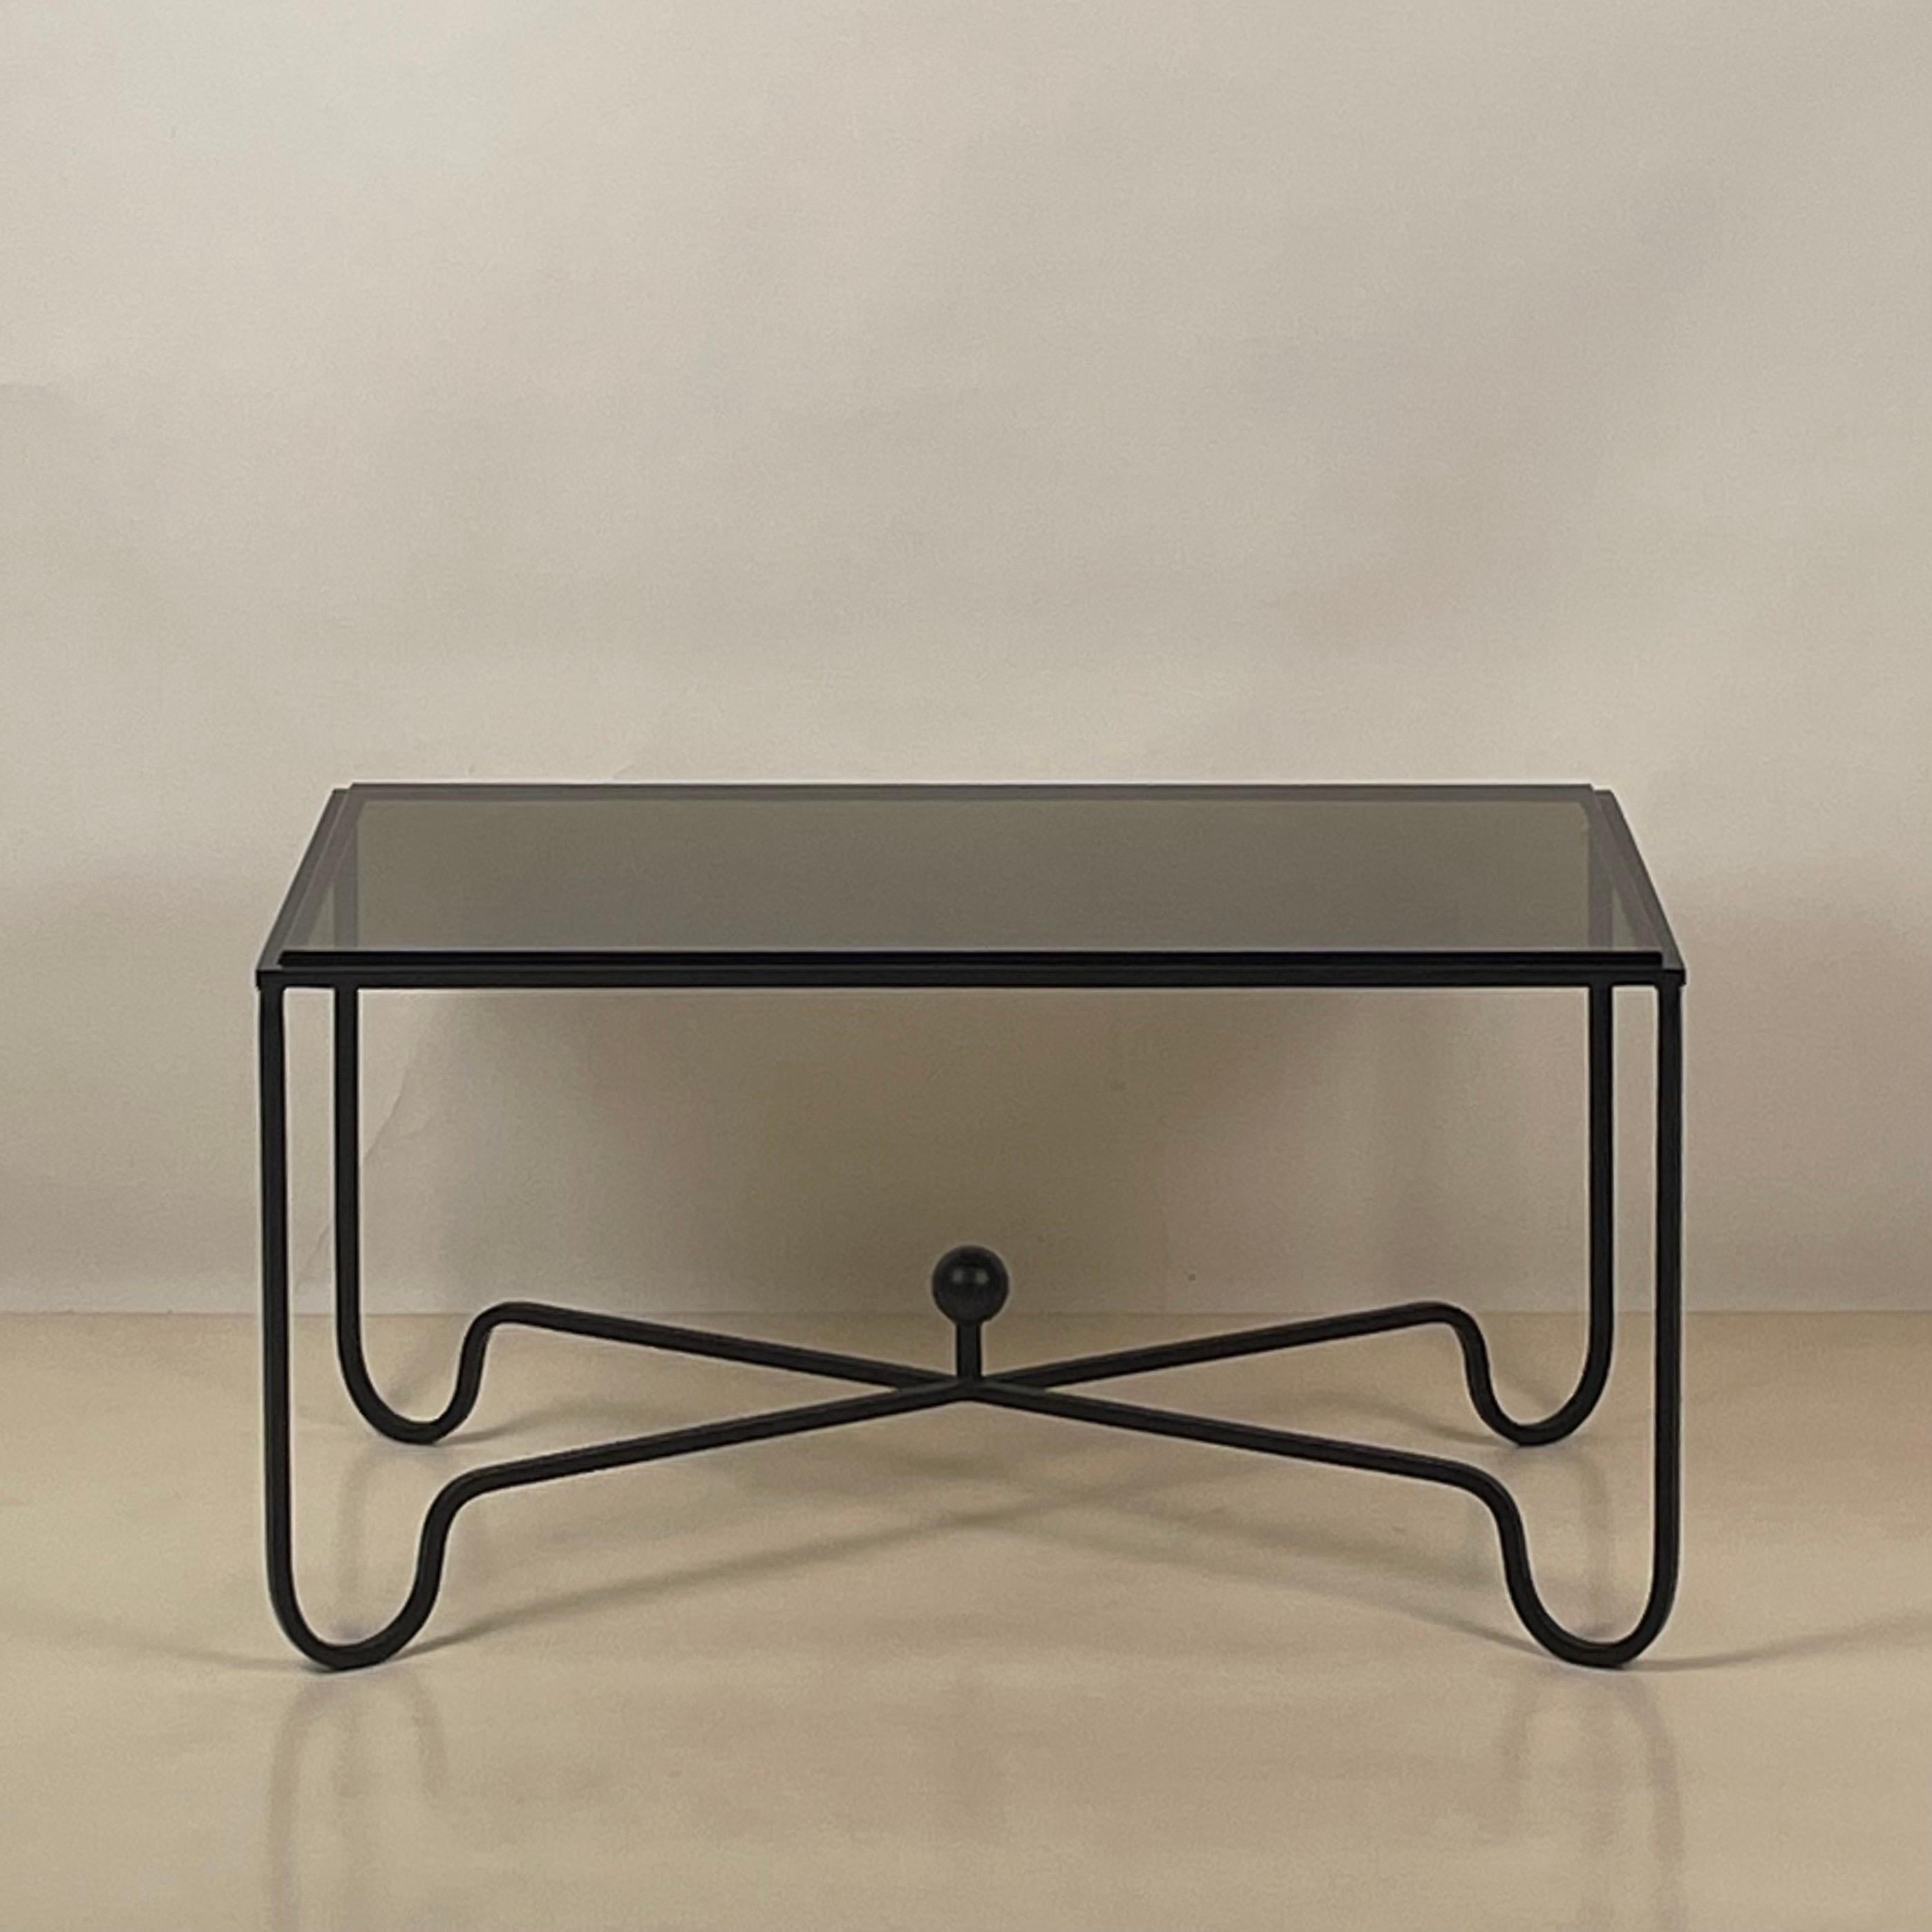 Large blackened iron and glass 'Entretoise' coffee table by Design Frères.

In clear (last picture) or smoked glass (please confirm when placing our order).

Chic and understated.